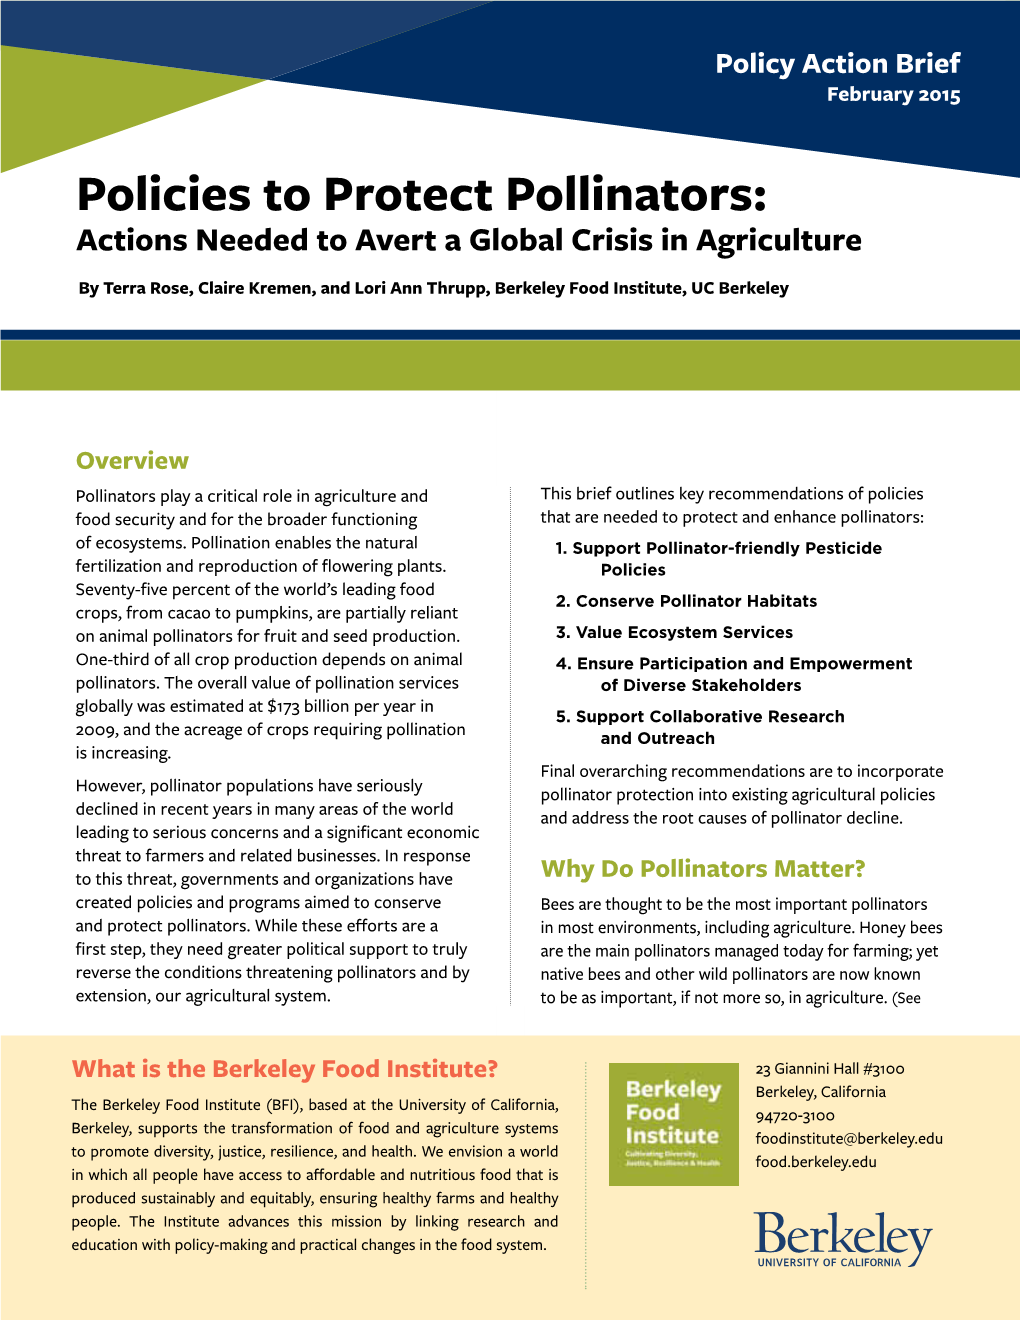 Policies to Protect Pollinators: Actions Needed to Avert a Global Crisis in Agriculture